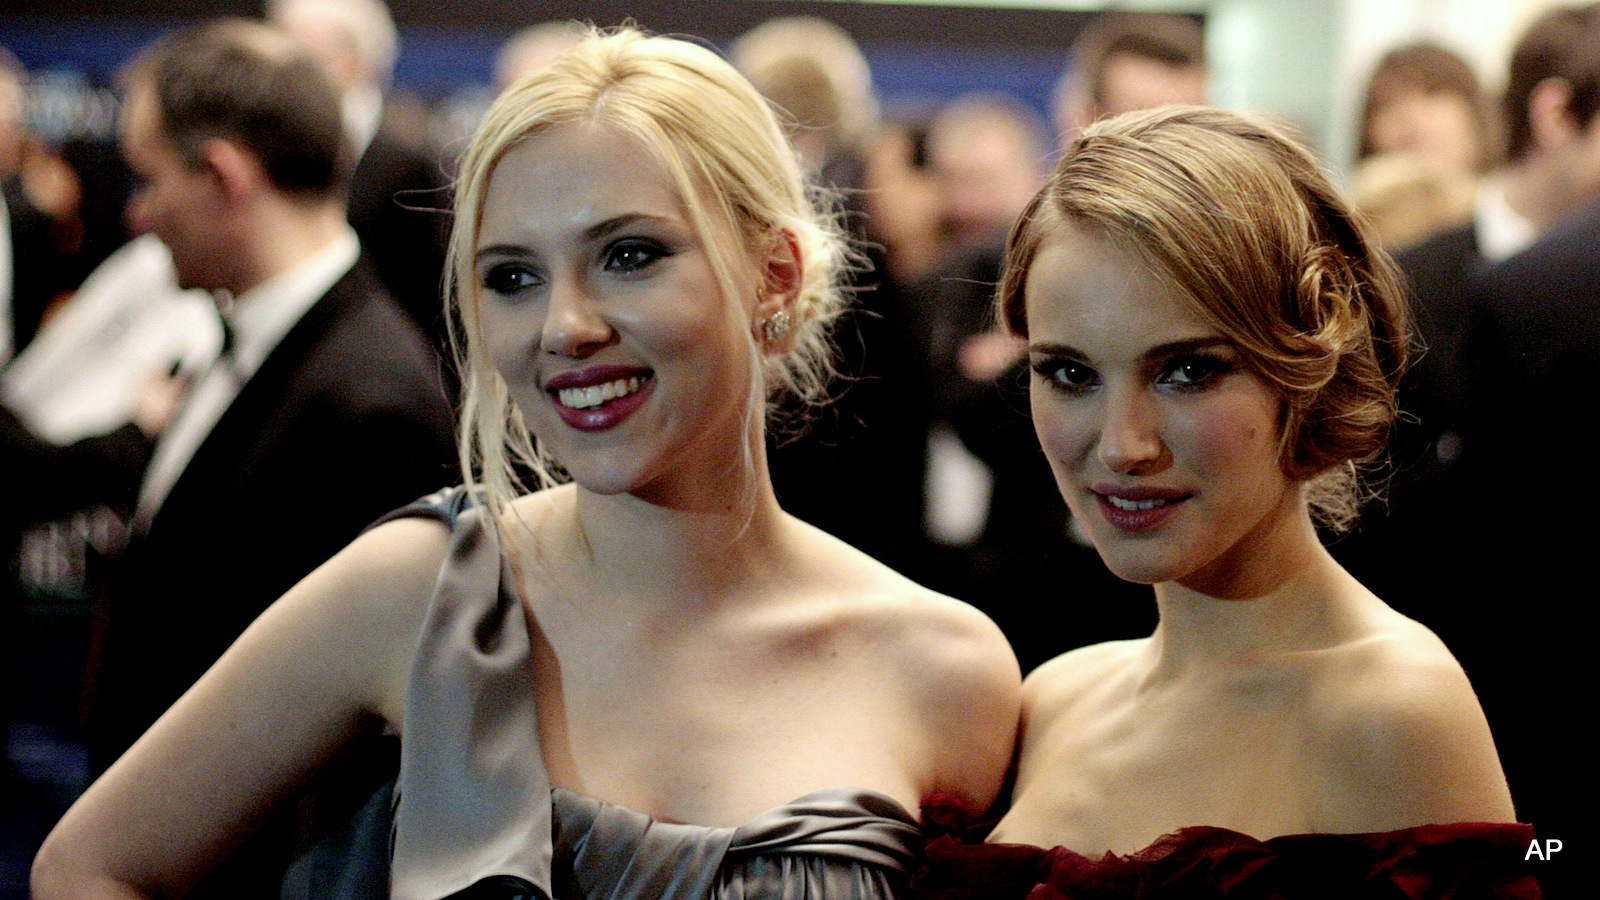 US actors Natalie Portman, right, and Scarlett Johansson attend a royal film Premiere in central London Tuesday Feb. 19, 2008.